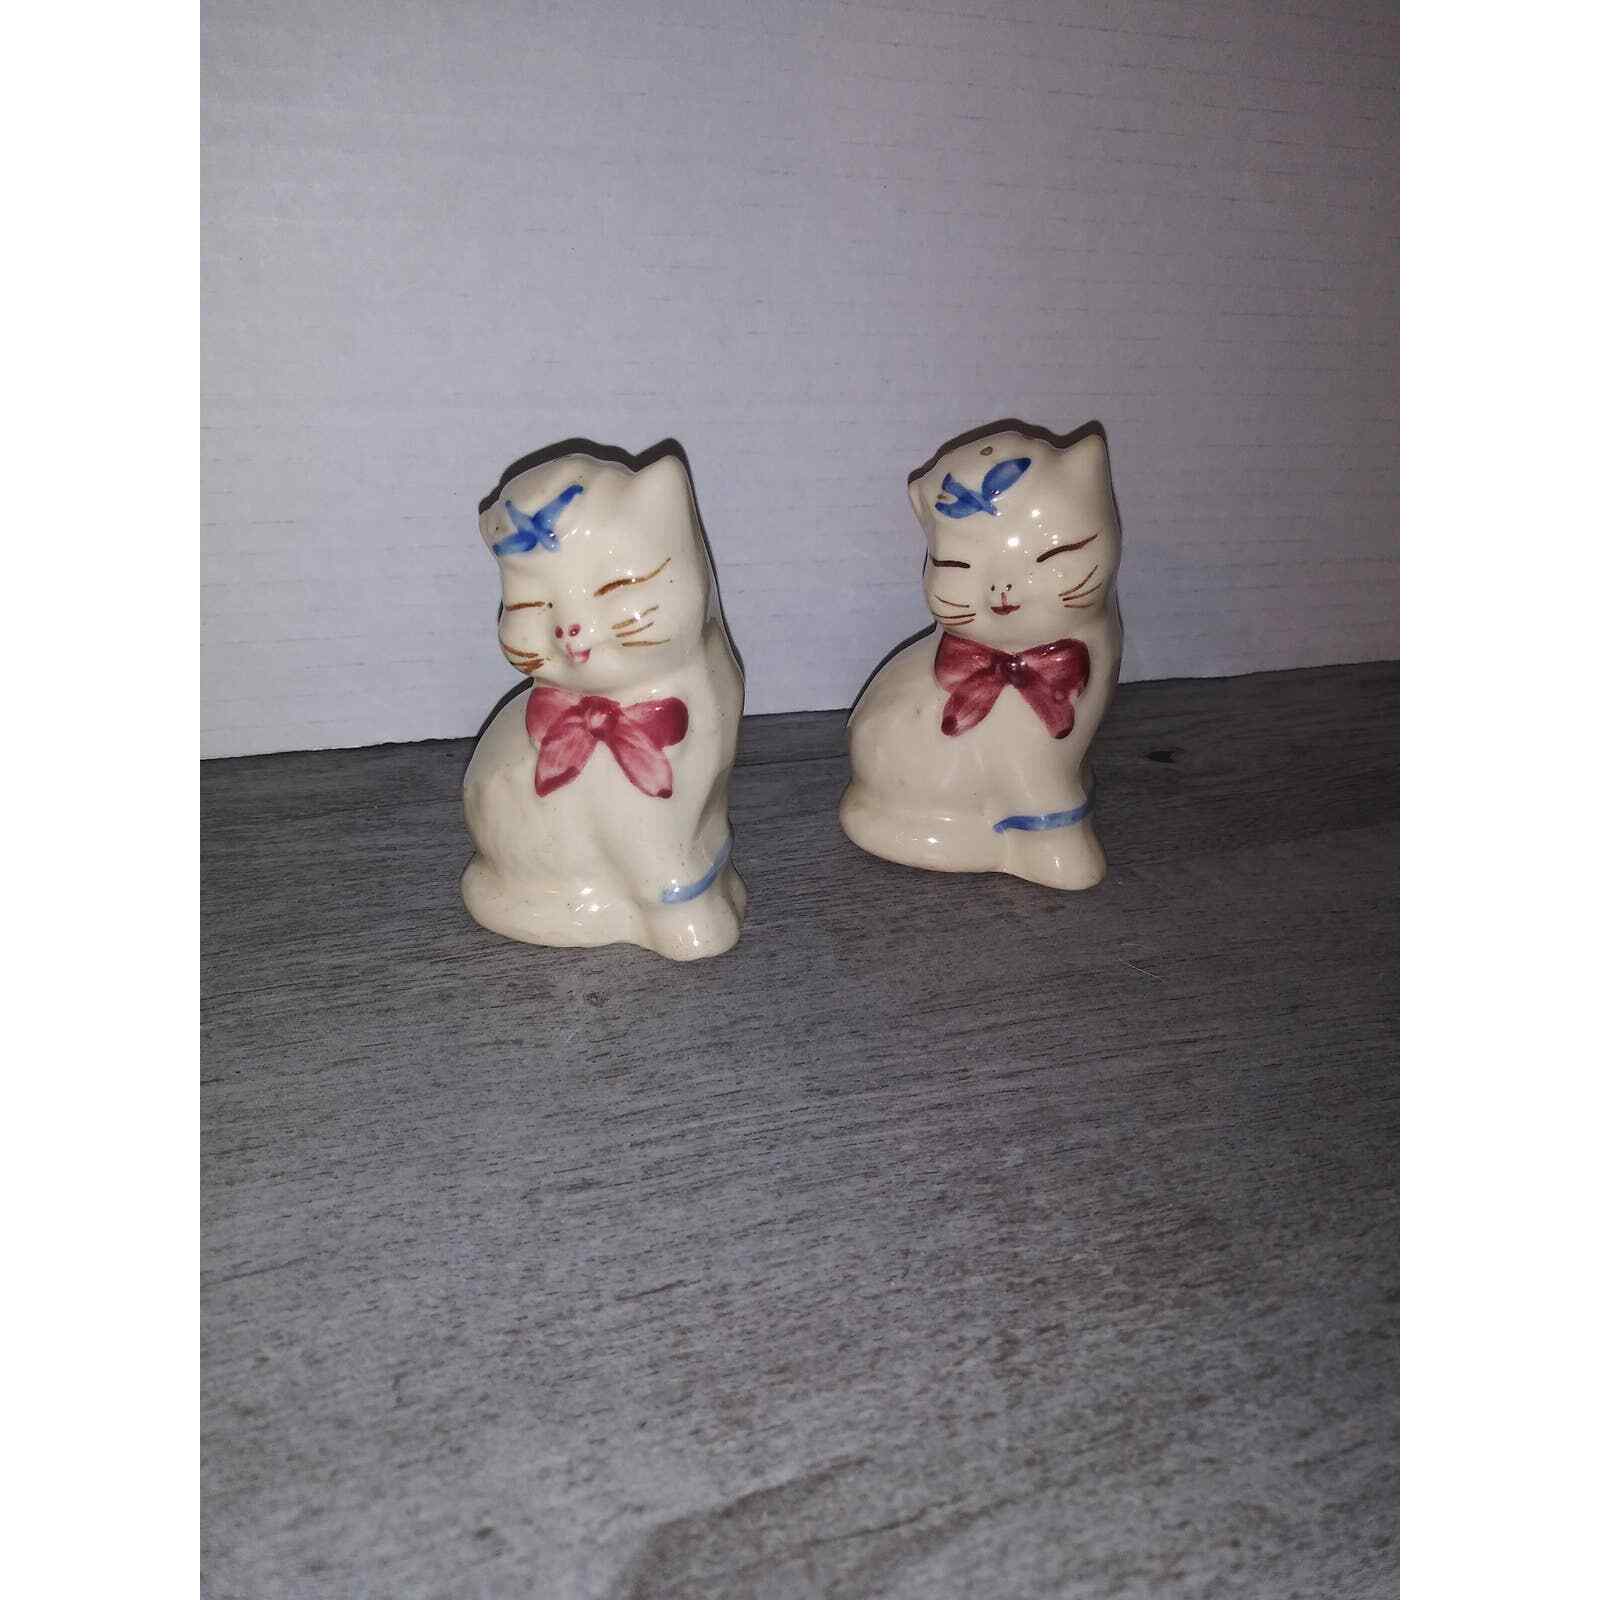 RARE Vintage Shawnee Puss N Boots Salt & Pepper Shakers Cats